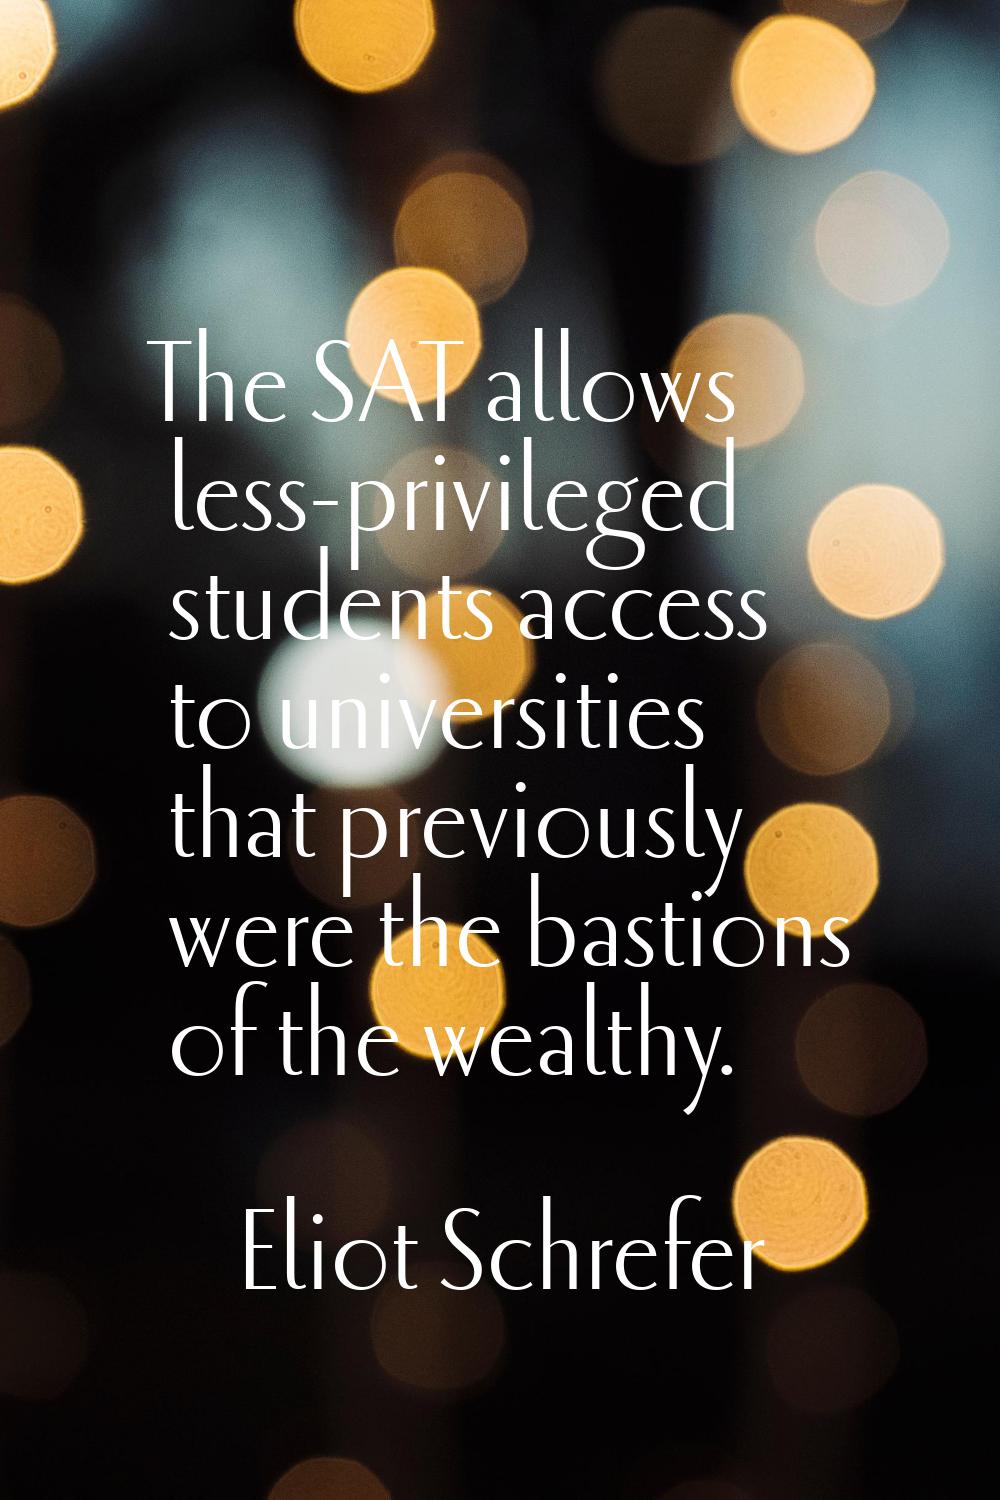 The SAT allows less-privileged students access to universities that previously were the bastions of